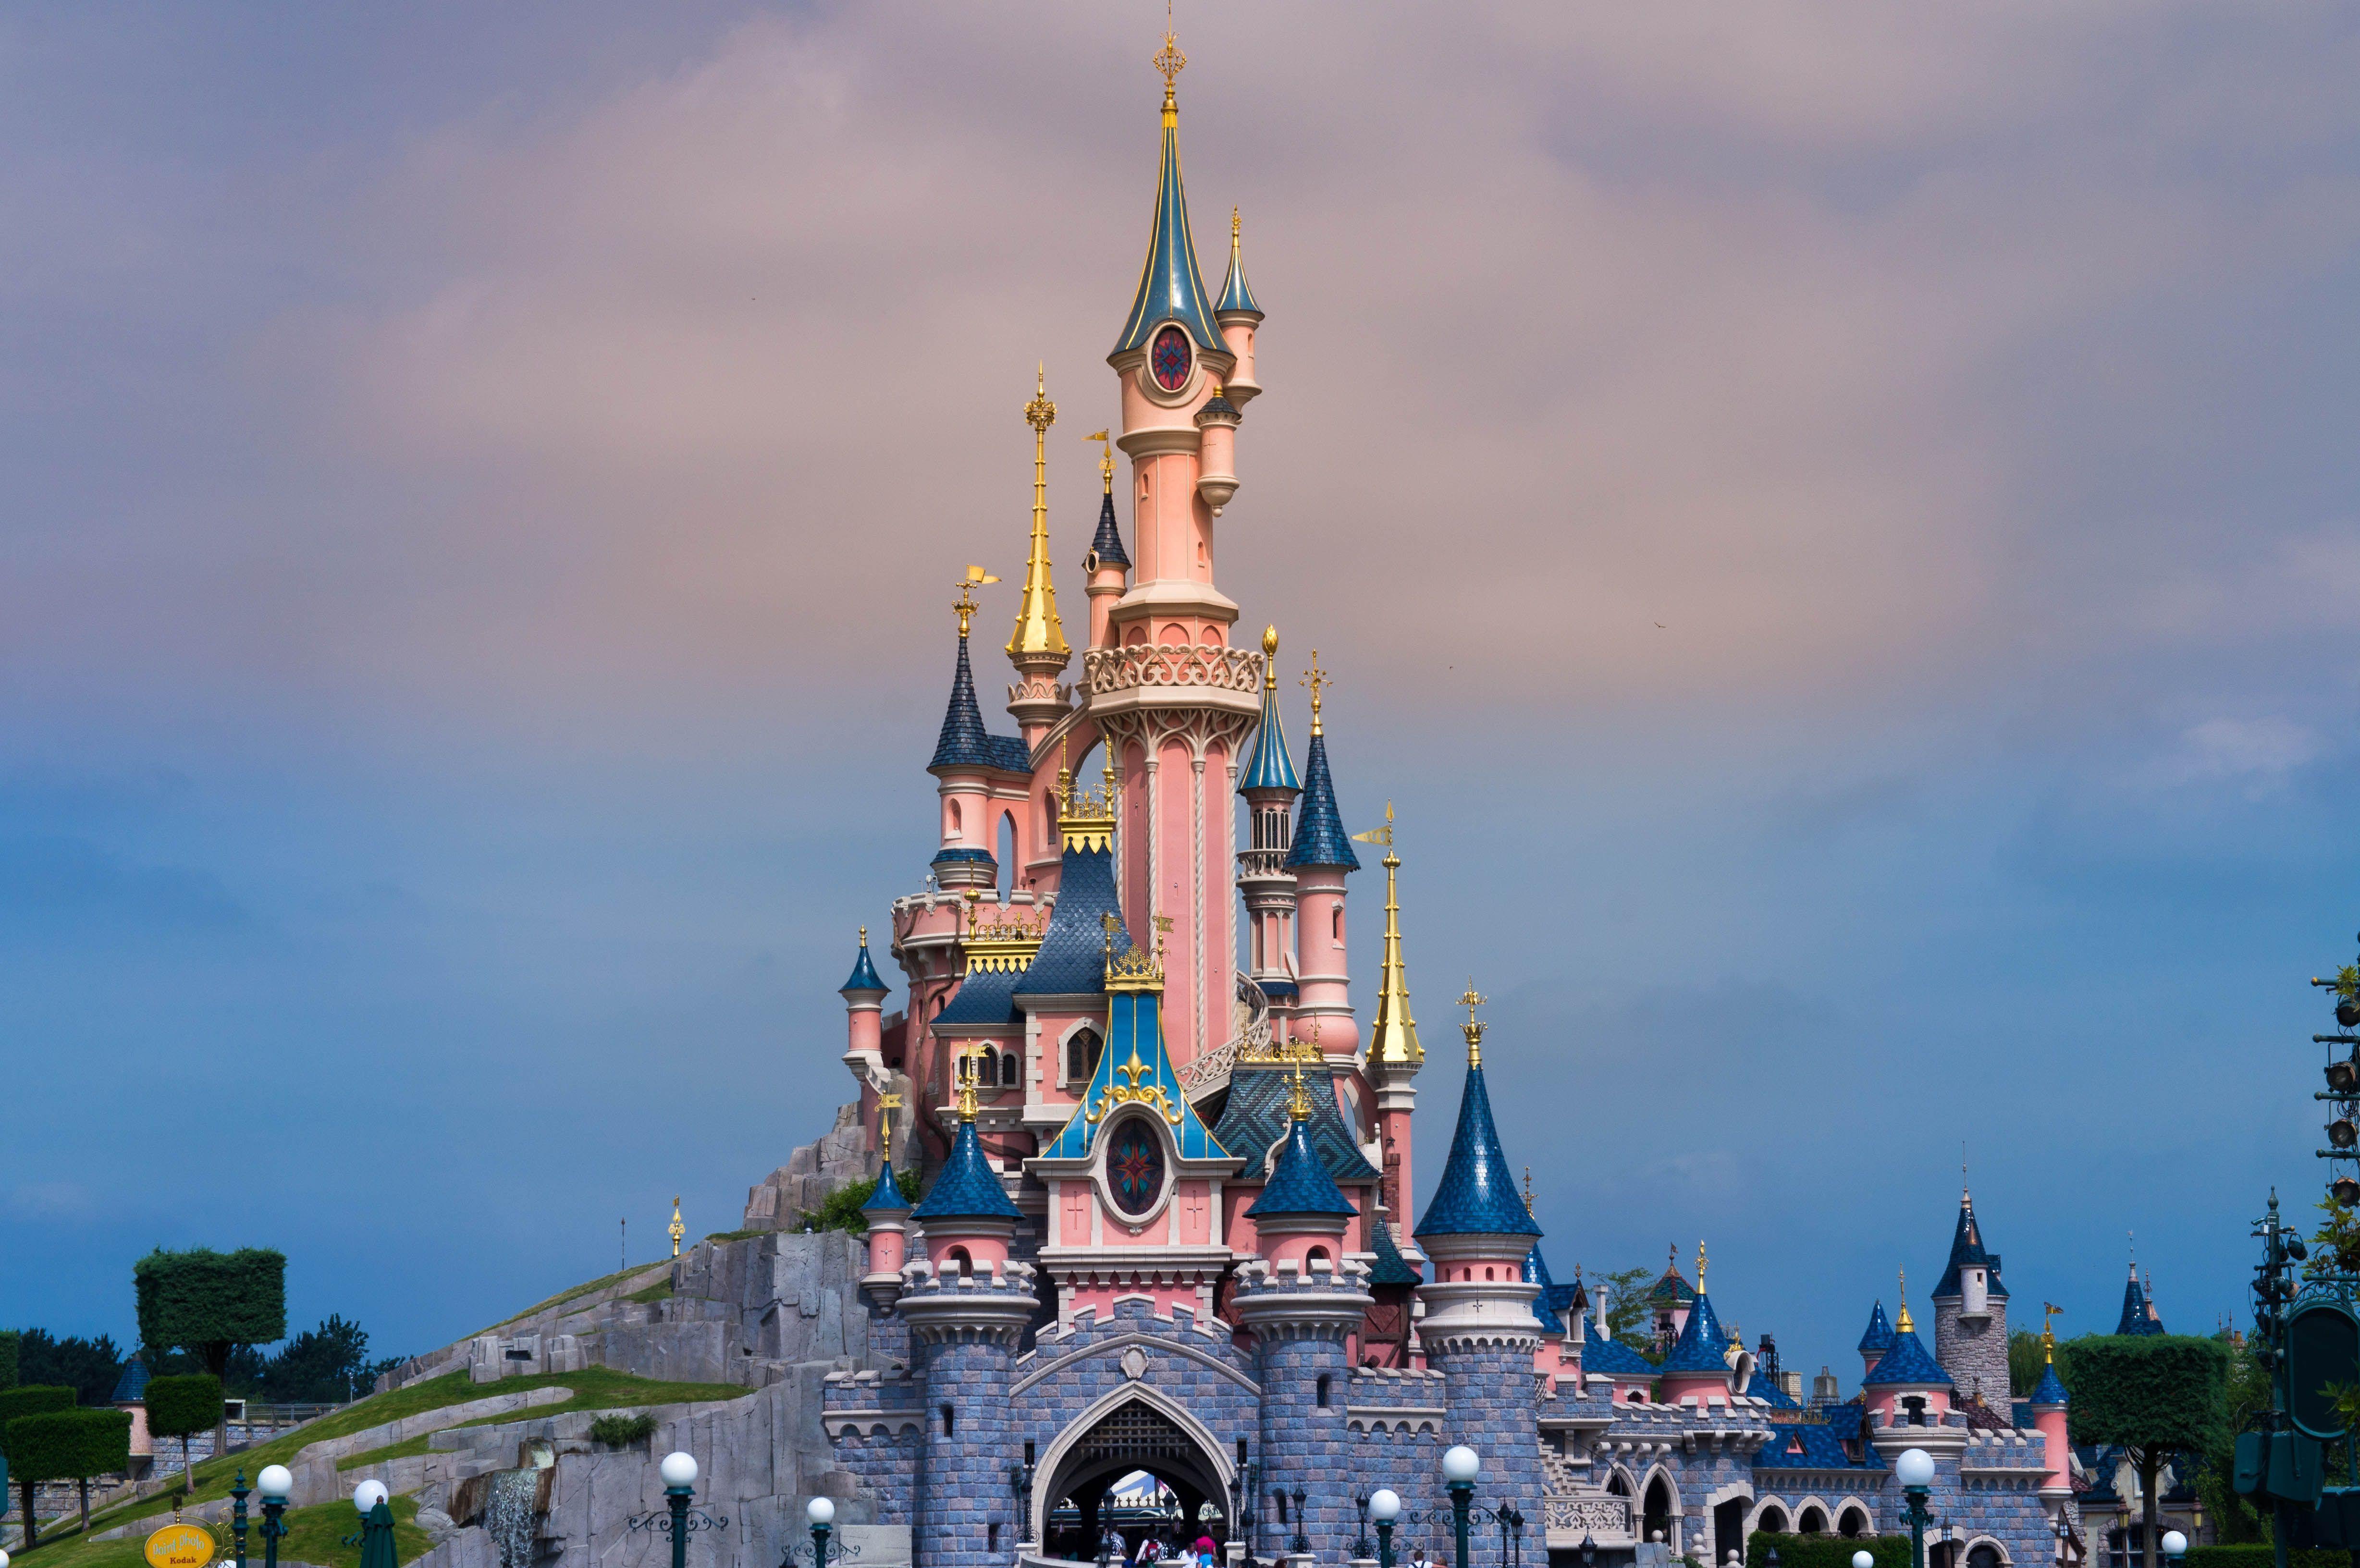 A large castle with many towers and turrets - Disneyland